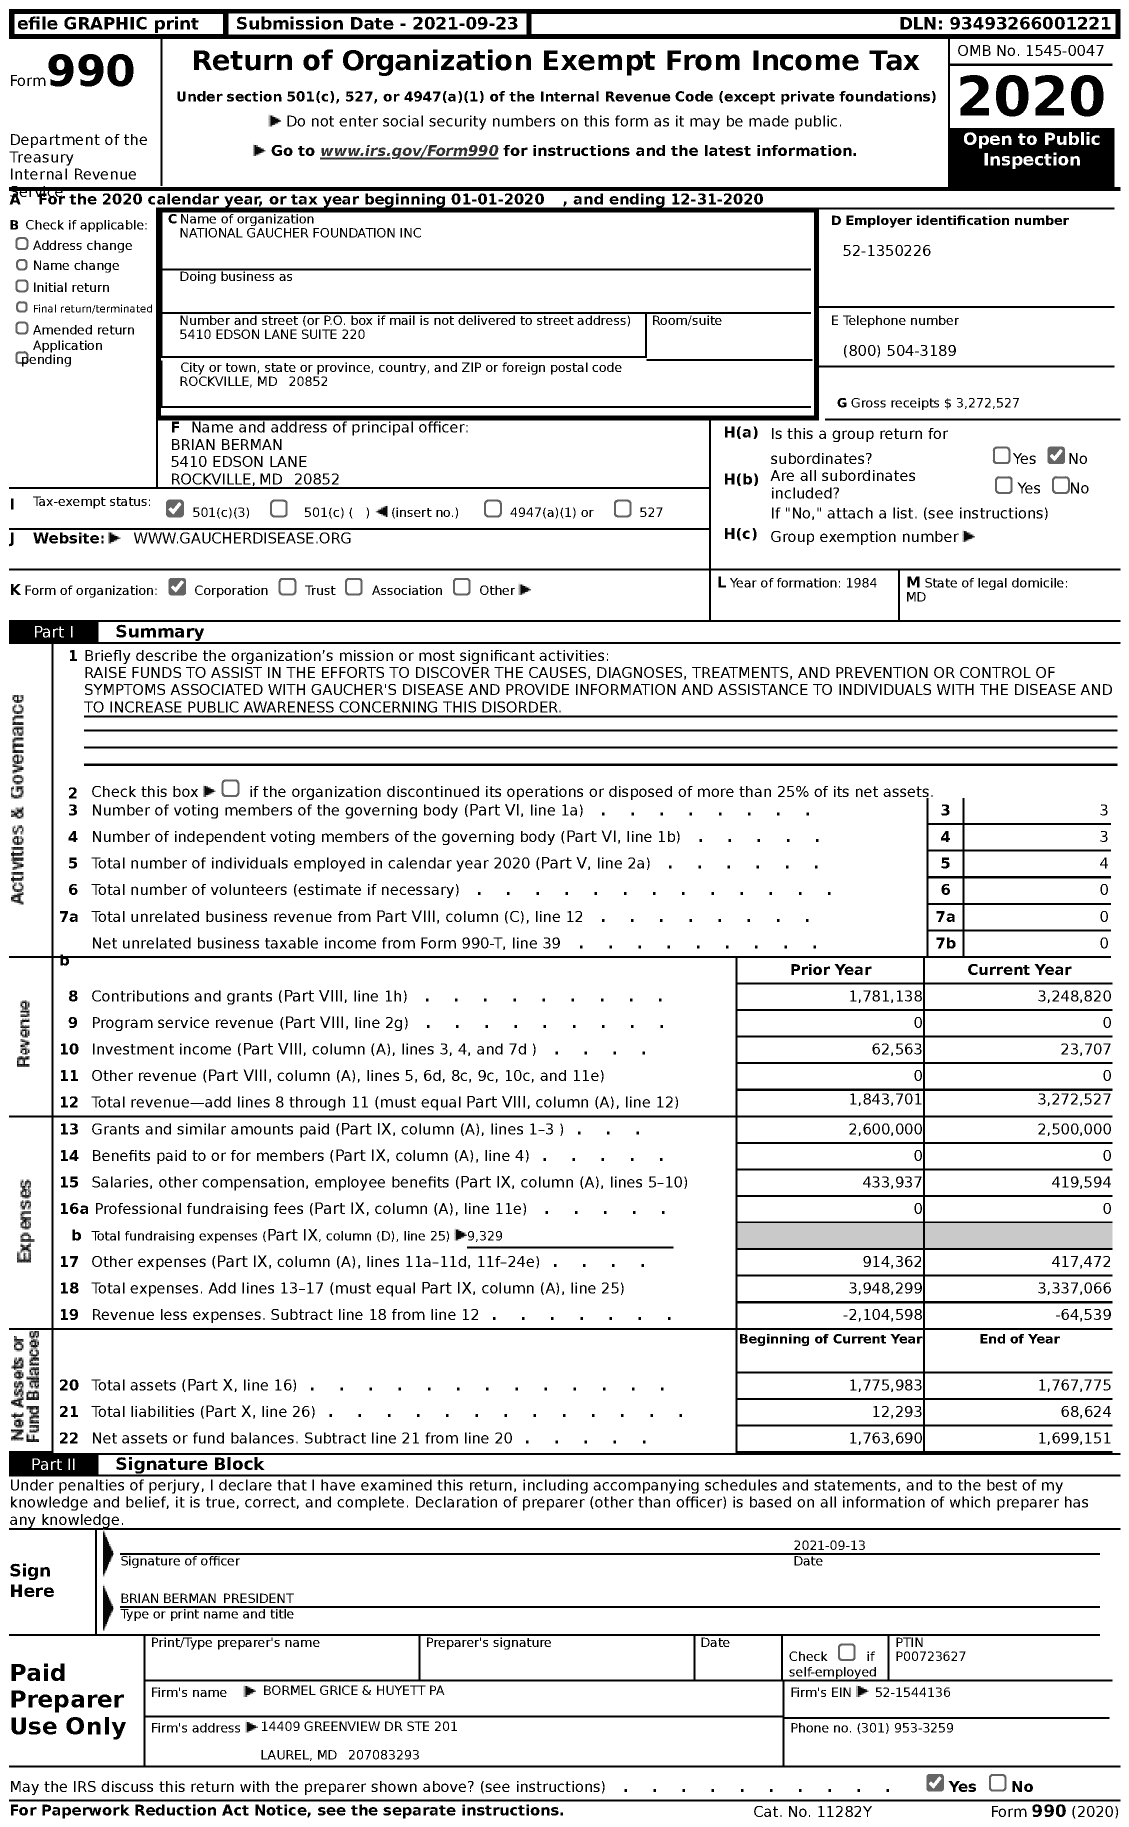 Image of first page of 2020 Form 990 for National Gaucher Foundation (NGF)